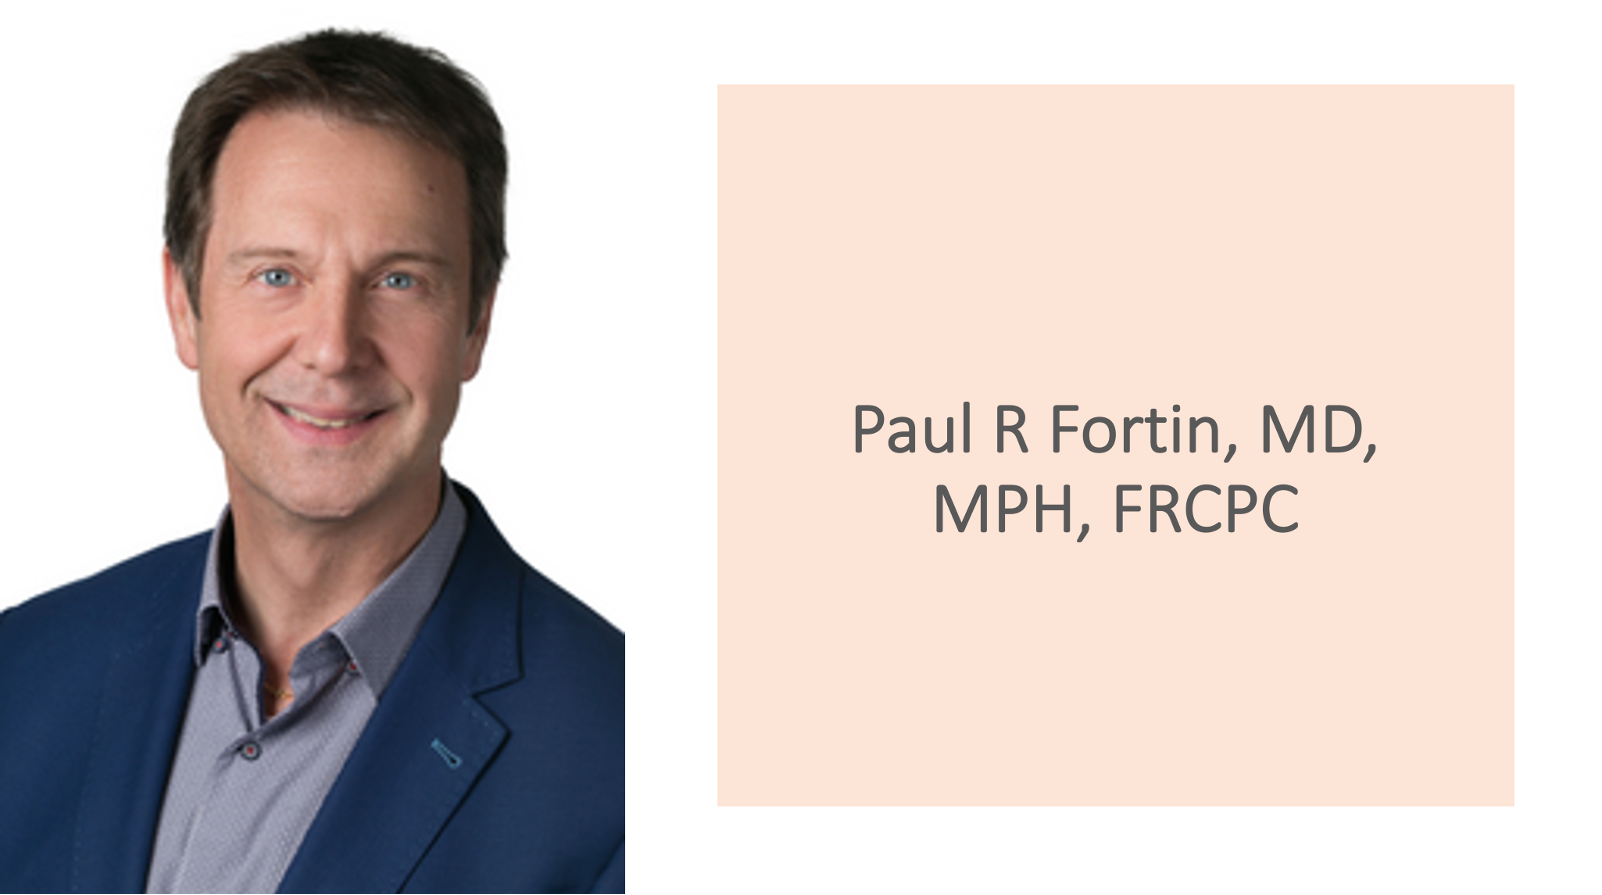 Paul R. Fortin, MD, MPH, FRCPC: COVID-19 Vaccine for Patients With Rheumatic Disease